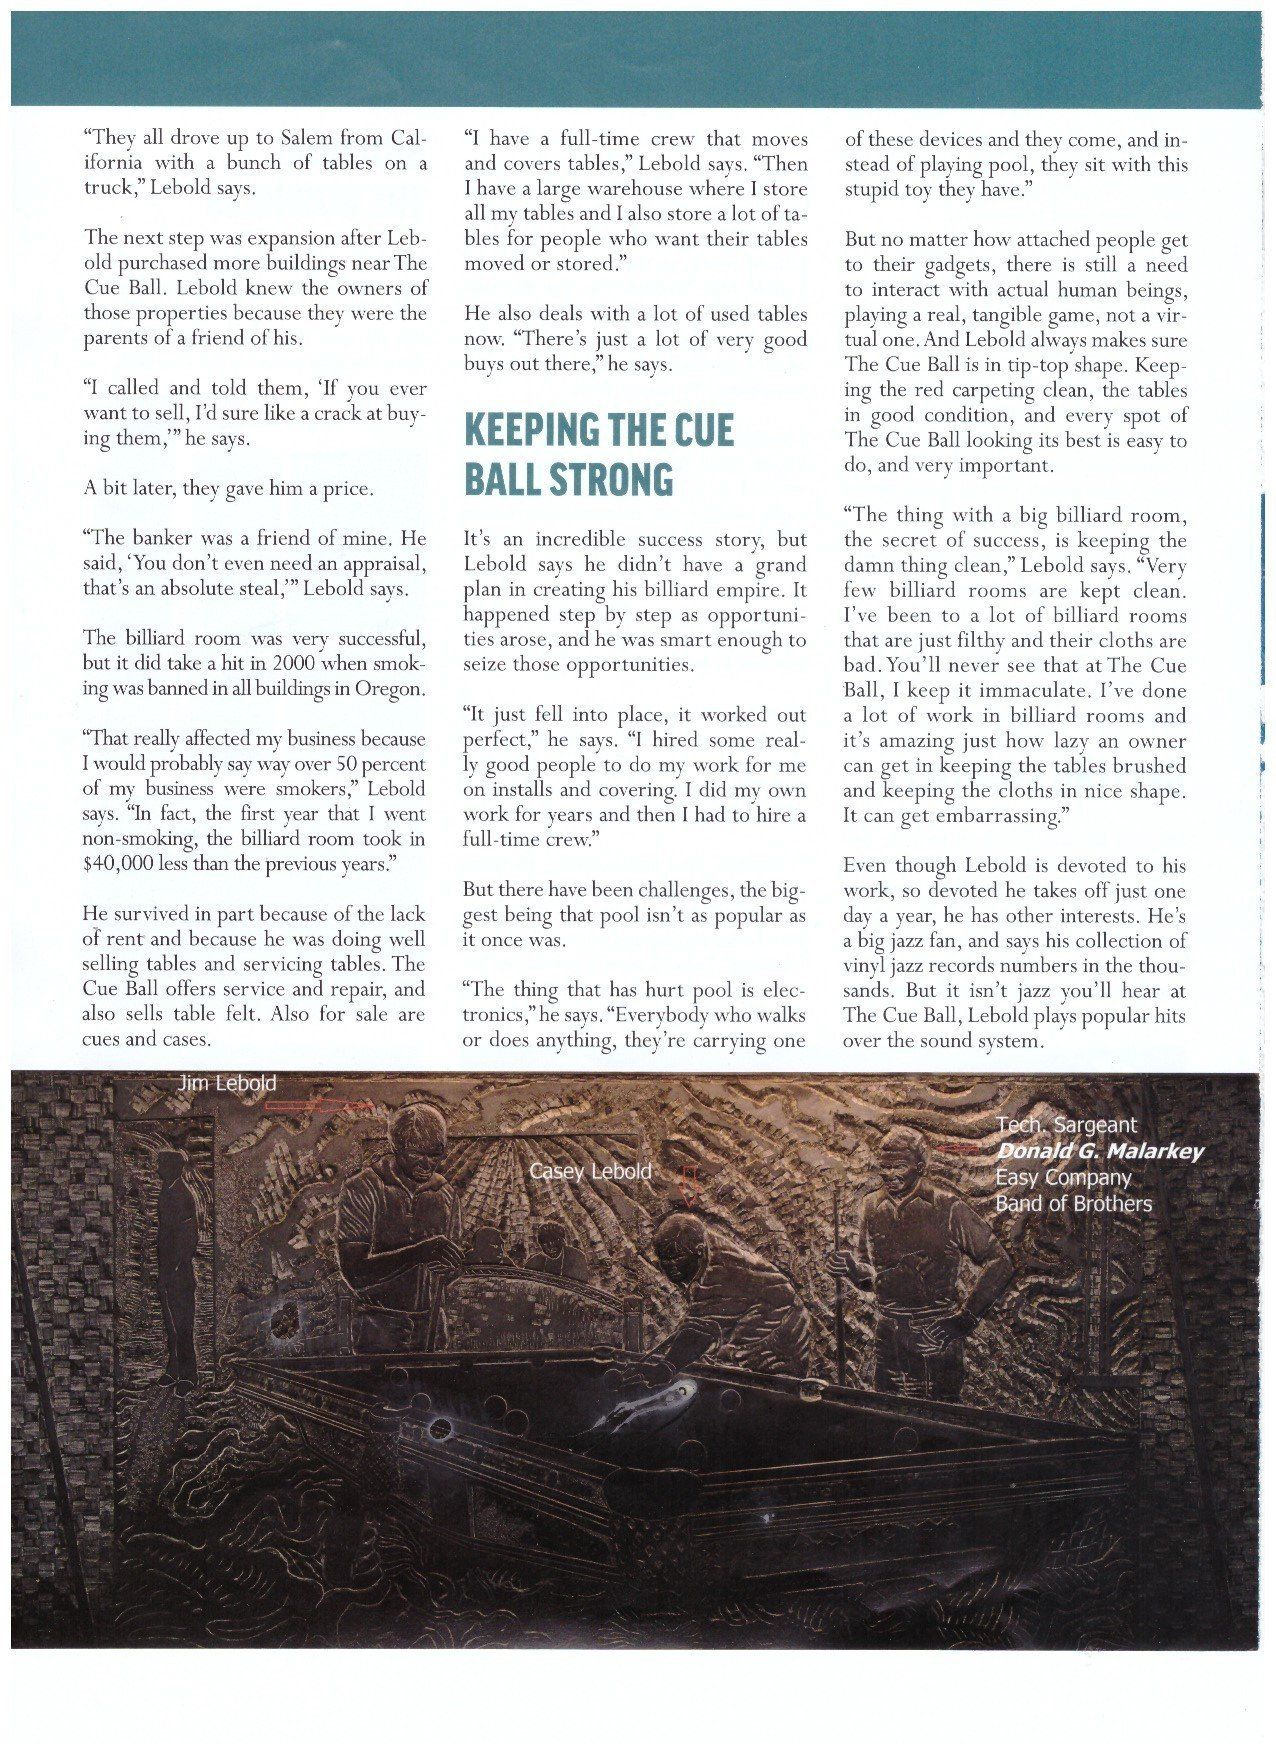 BCA Magazine Page 3 — Salem, OR — The Cue Ball